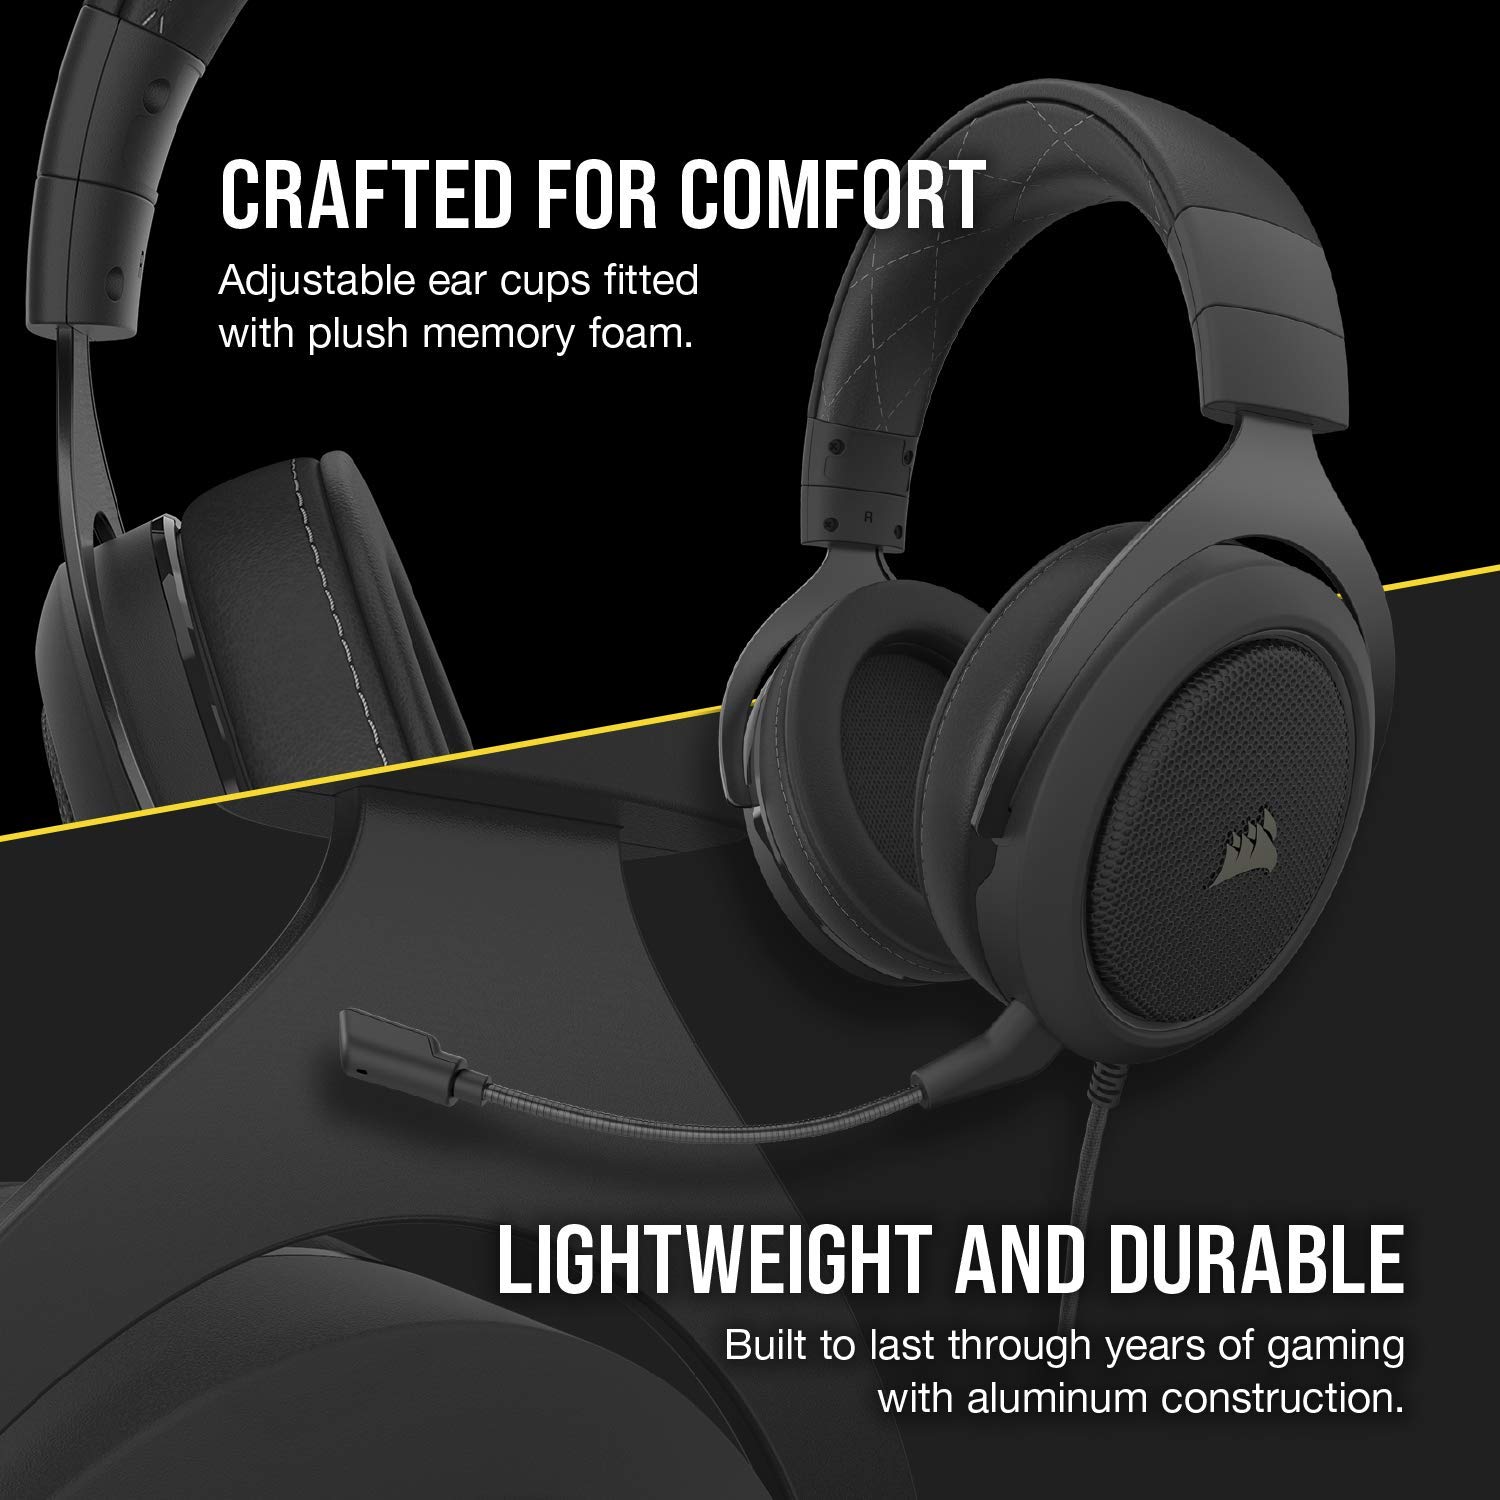 Corsair HS60 PRO - 7.1 Virtual Surround Sound Gaming Headset with USB DAC - Works with PC, Xbox Series X, Xbox Series S, Xbox One, PS5, PS4, and Nintendo Switch - Carbon (CA-9011213-NA)